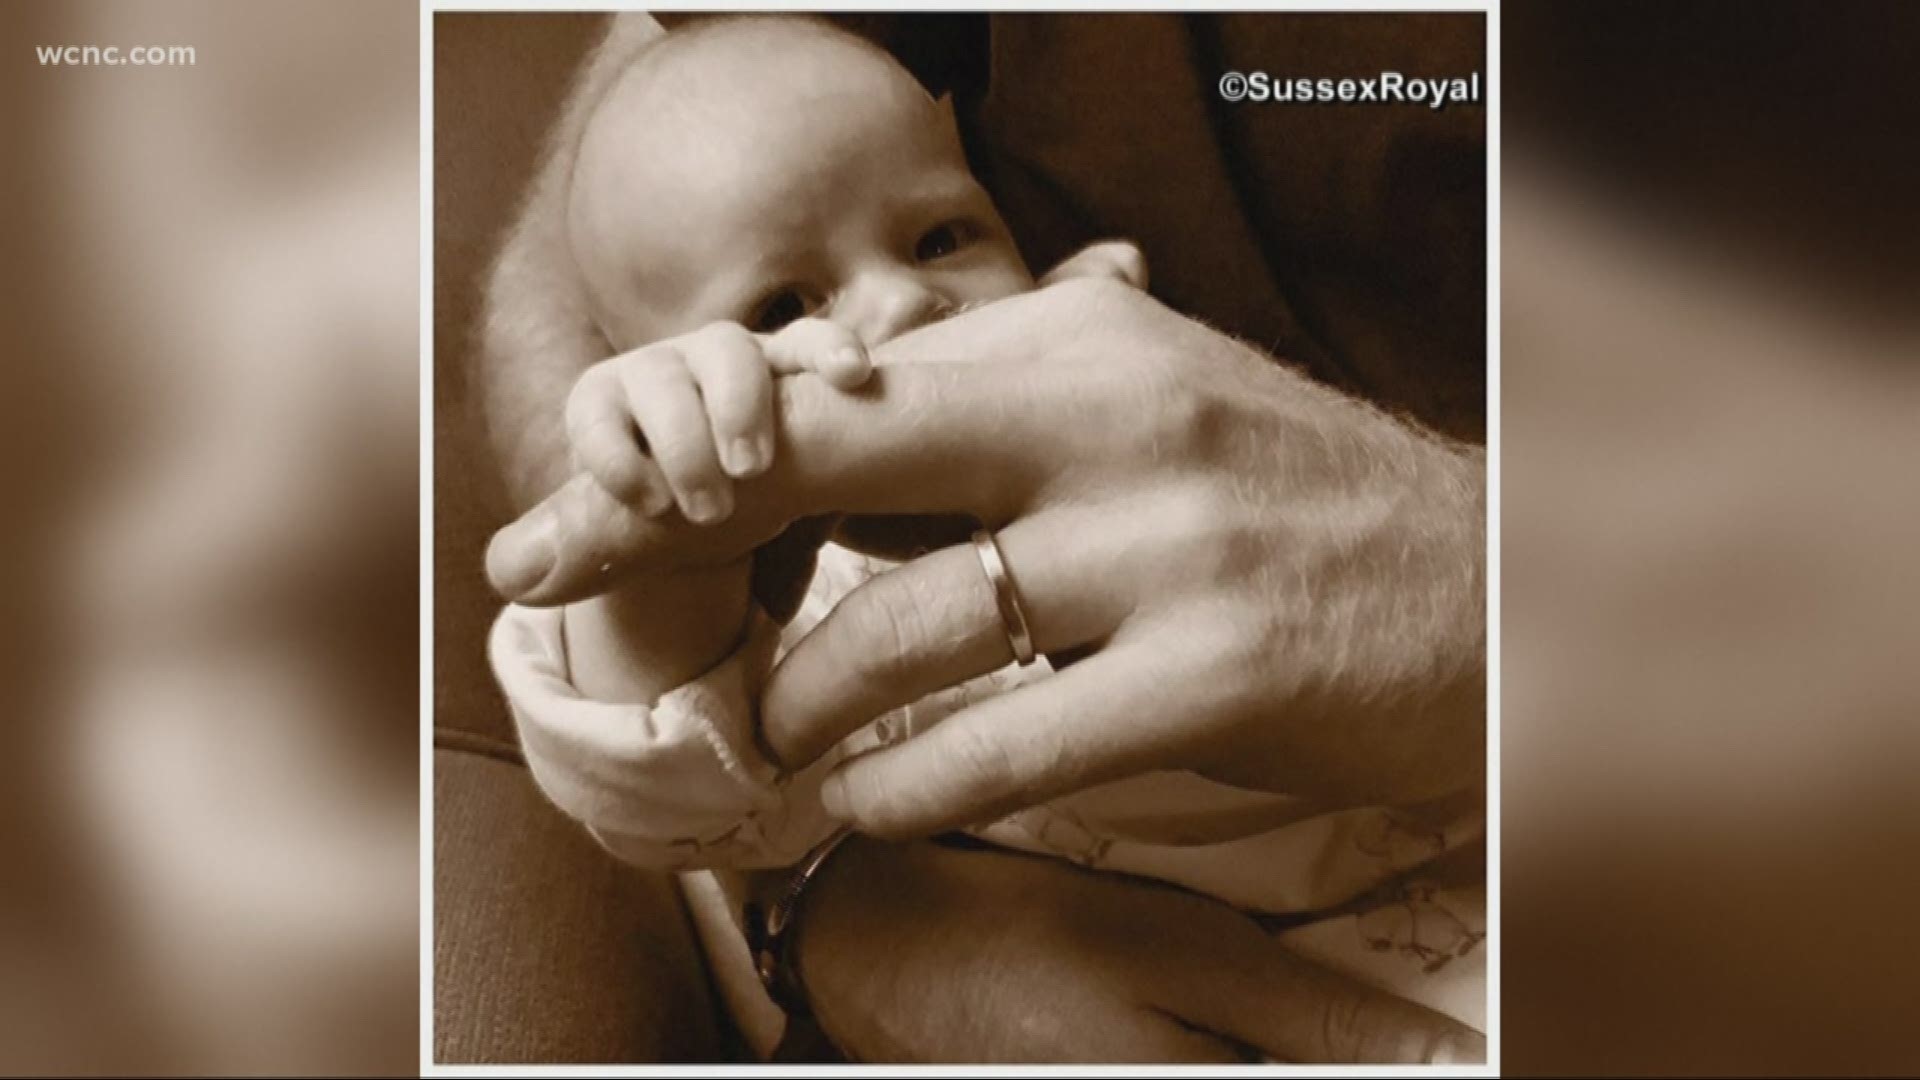 In honor of his first Father's Day as a dad, Prince Harry shared this adorable photo of royal baby Archie on Instagram.